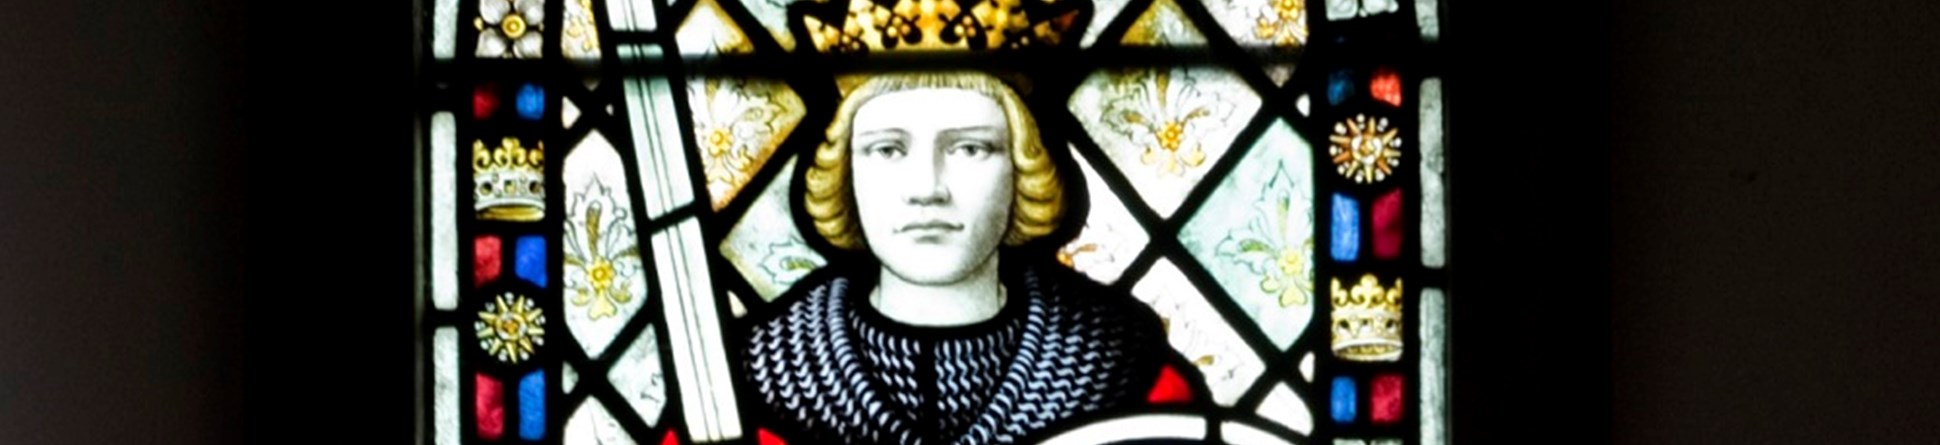 Detail view of the stained glass window showing King Ethelbert in St Mary's Church, Herne Bay, Kent